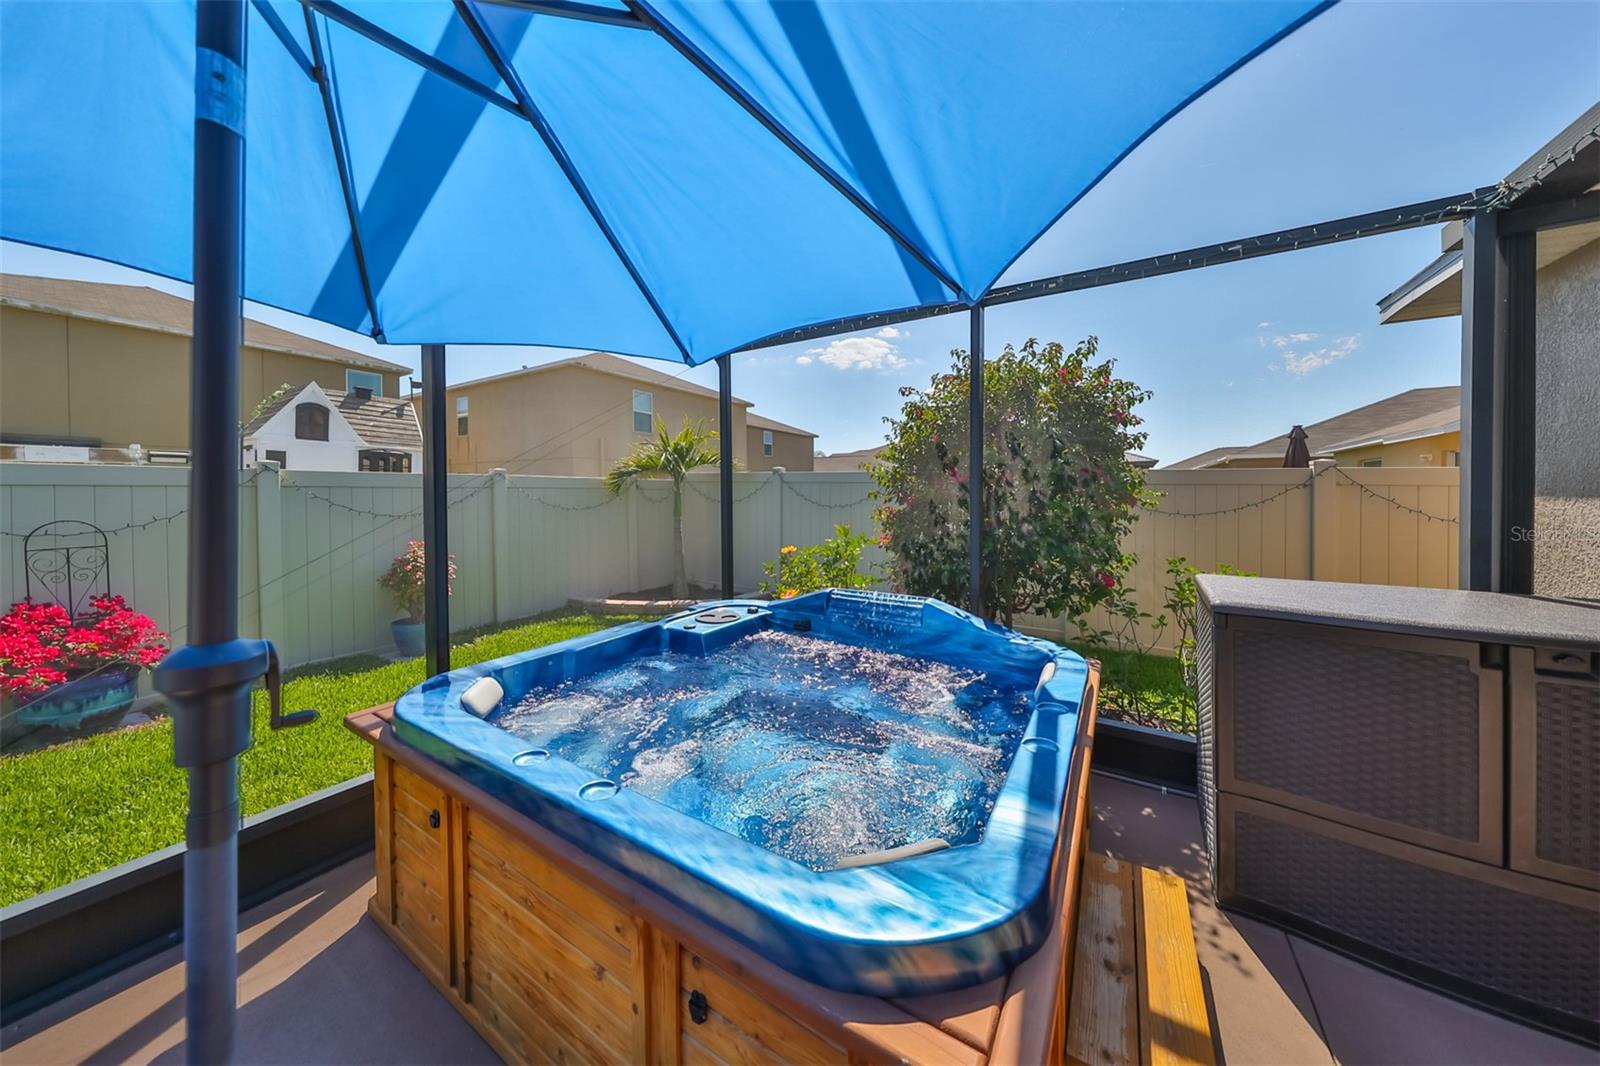 Stunning, SPARKLING $10,000 SPA - only 2 YEARS YOUNG - conveys with a FULL PRICE OFFER.